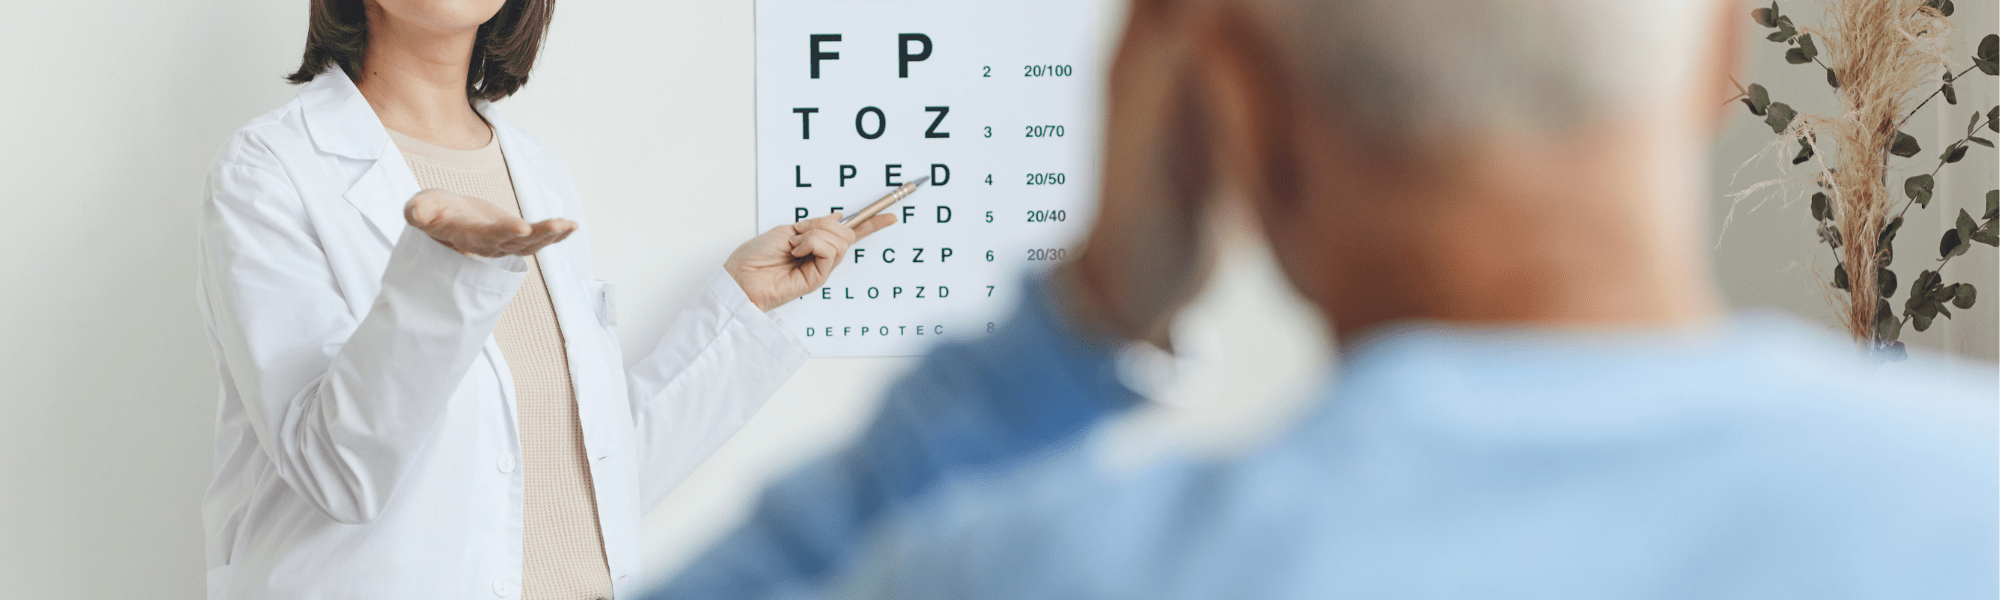 patients reading chart during an eye doctor exam 